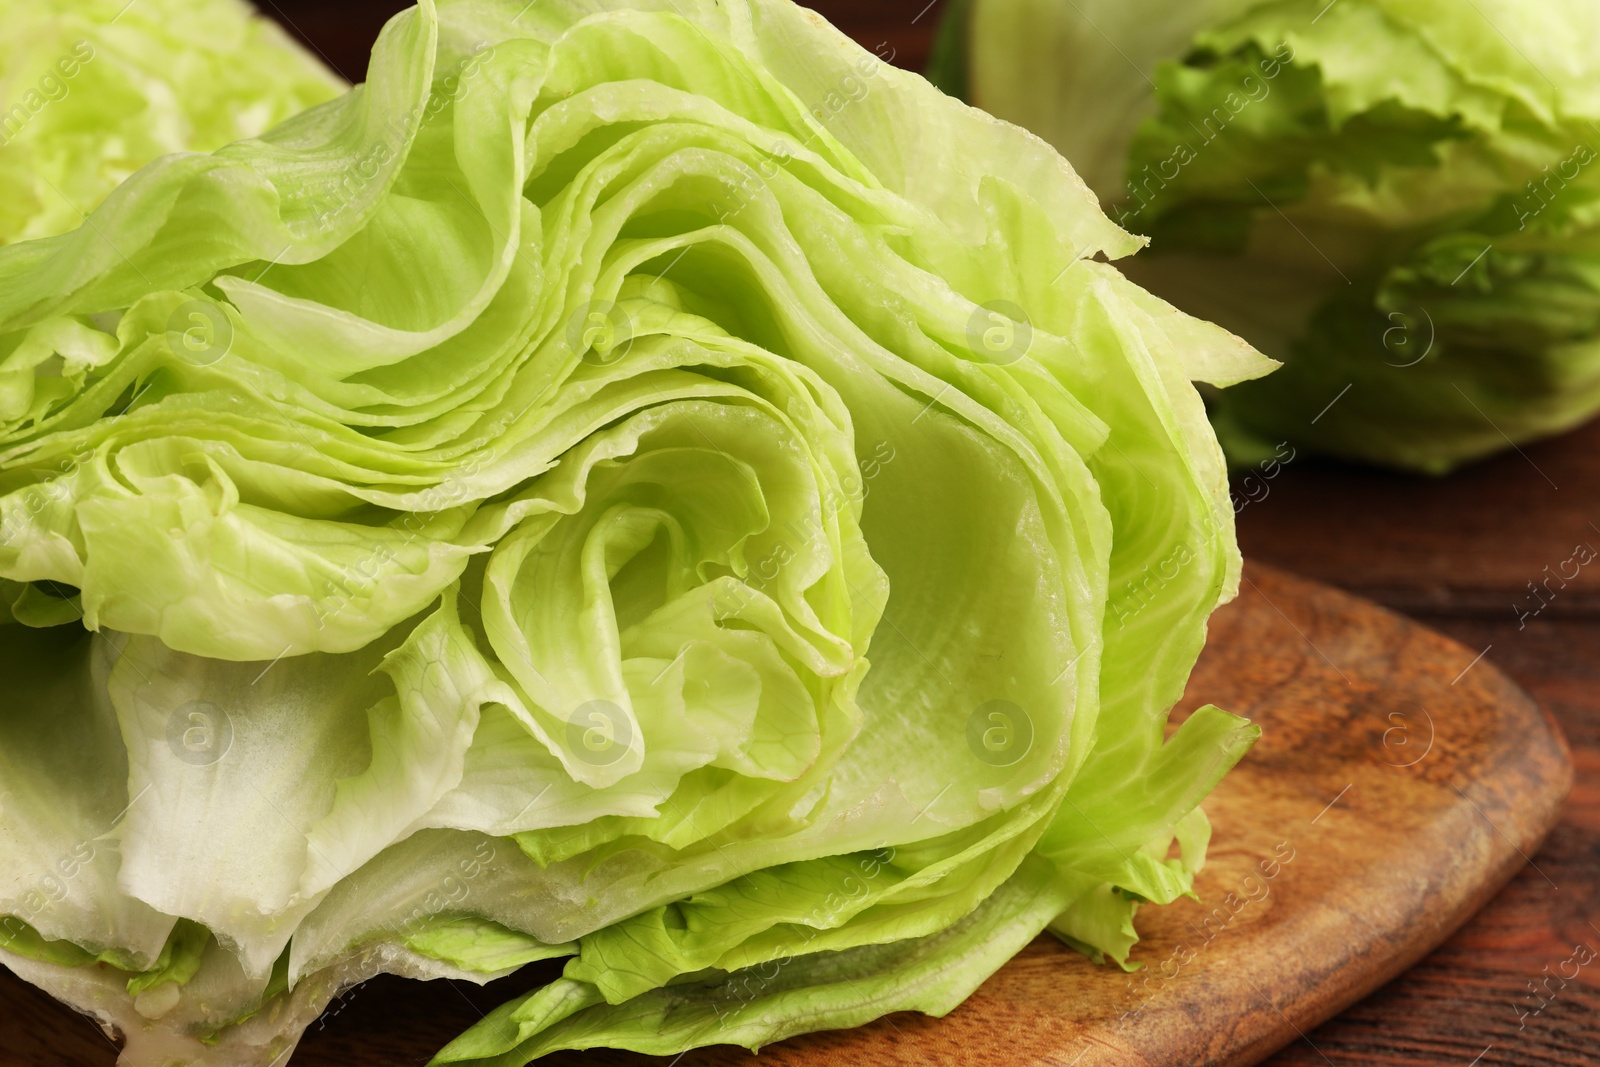 Photo of Board with half of fresh green iceberg lettuce head on wooden table, closeup